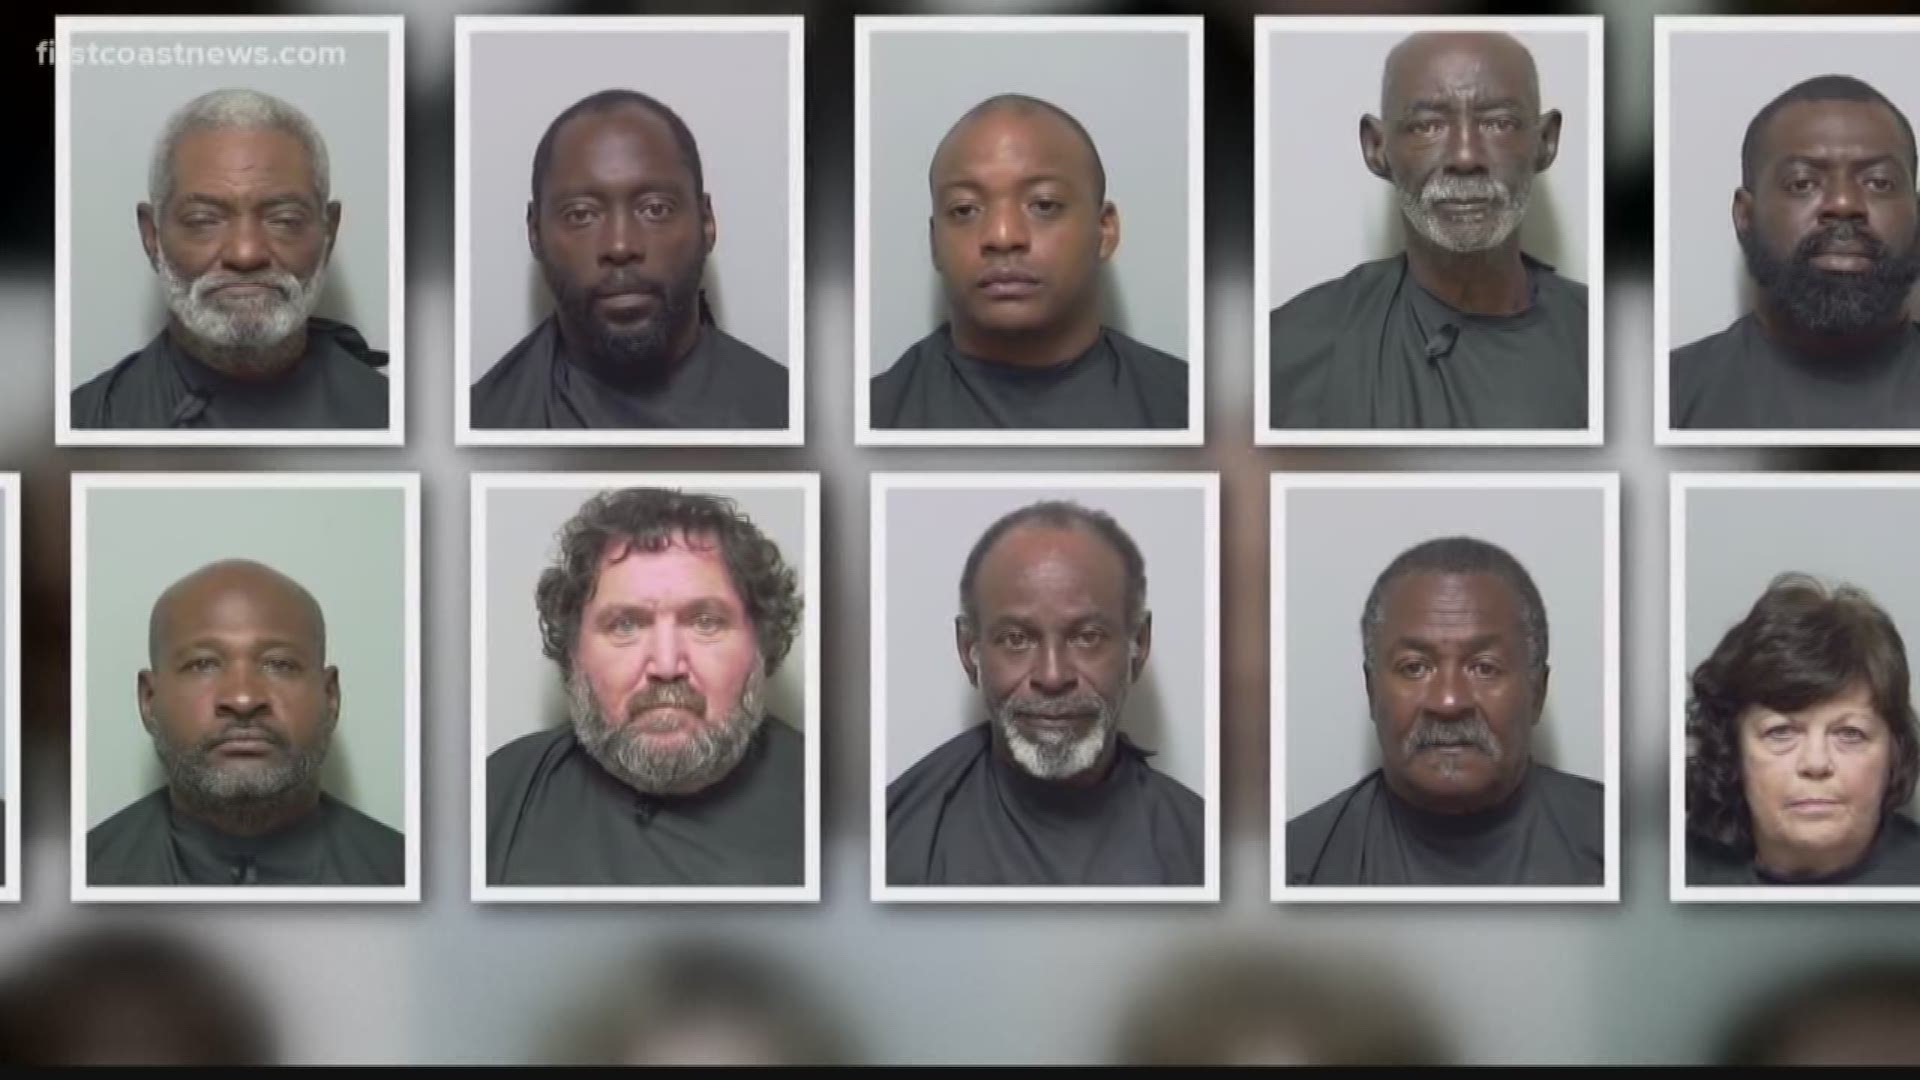 13 people facing drug charges after Putnam County 'warrant roundup